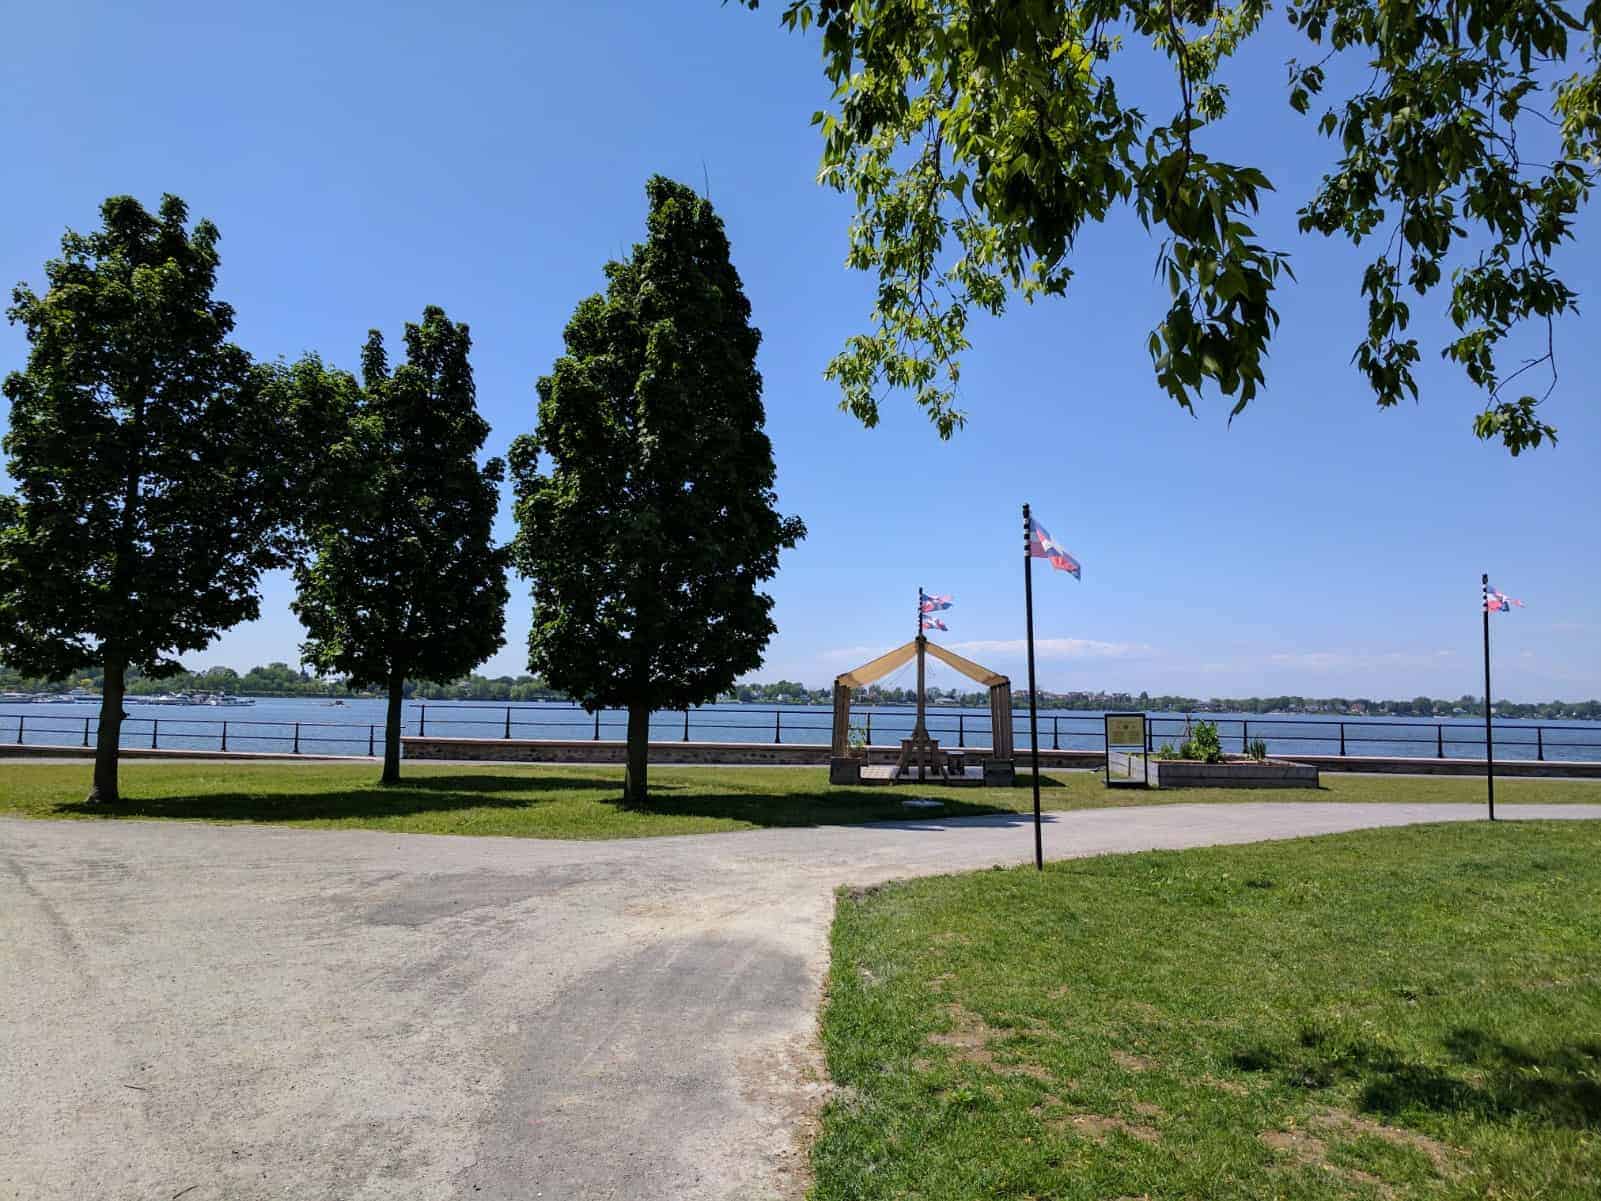 Bike to Historical Site close to Montreal